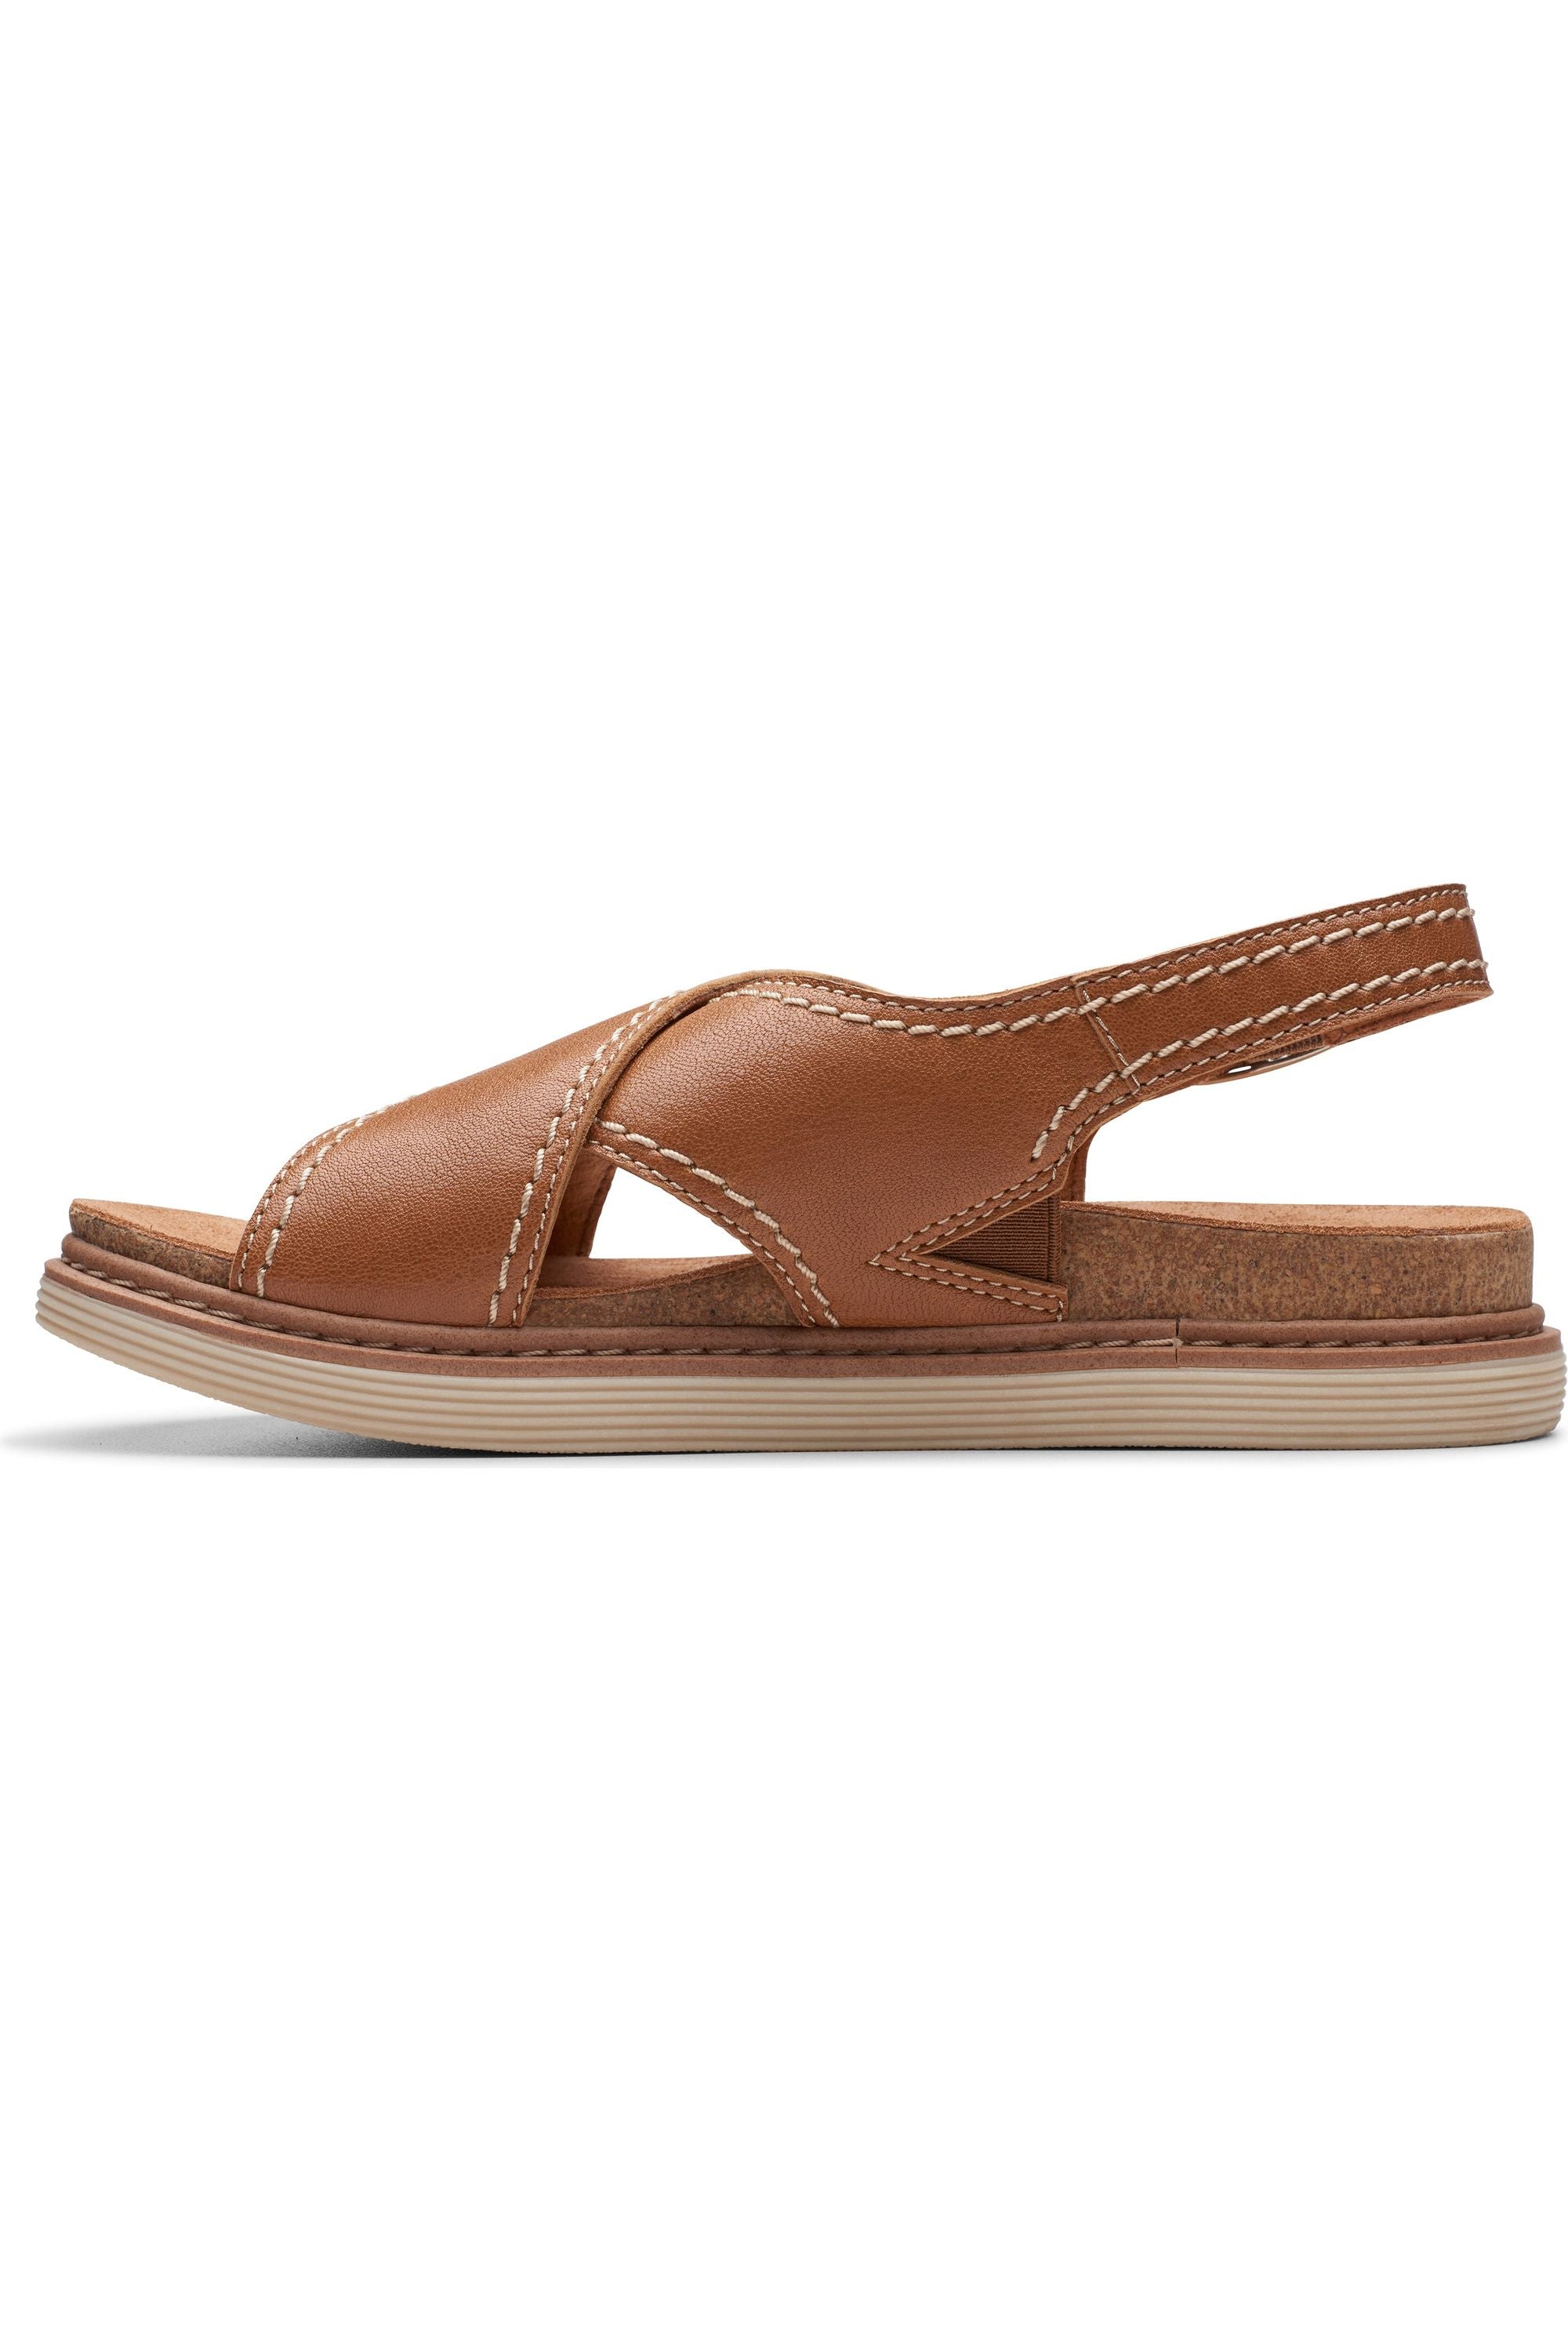 Clarks Arwell Sling in Tan Leather